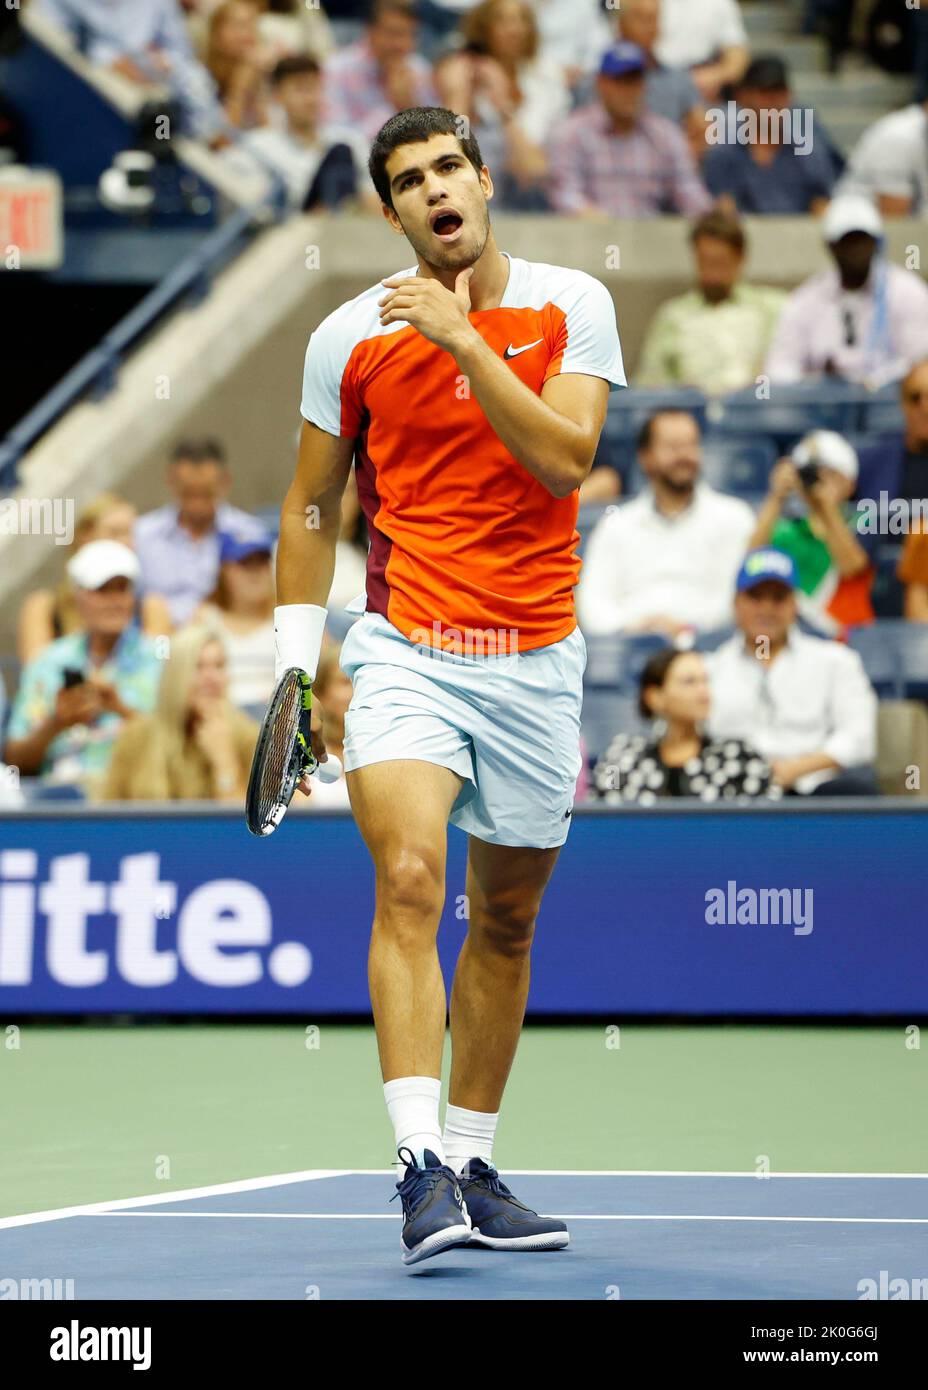 New York, USA, 11th. September 2022. Spanish tennis player Carlos Alcaraz reacts during the MenÕs Final of the  US  Open  Championships,Billie Jean King National Tennis Center on Sunday 11 September 2022. © Juergen Hasenkopf / Alamy Live News Stock Photo